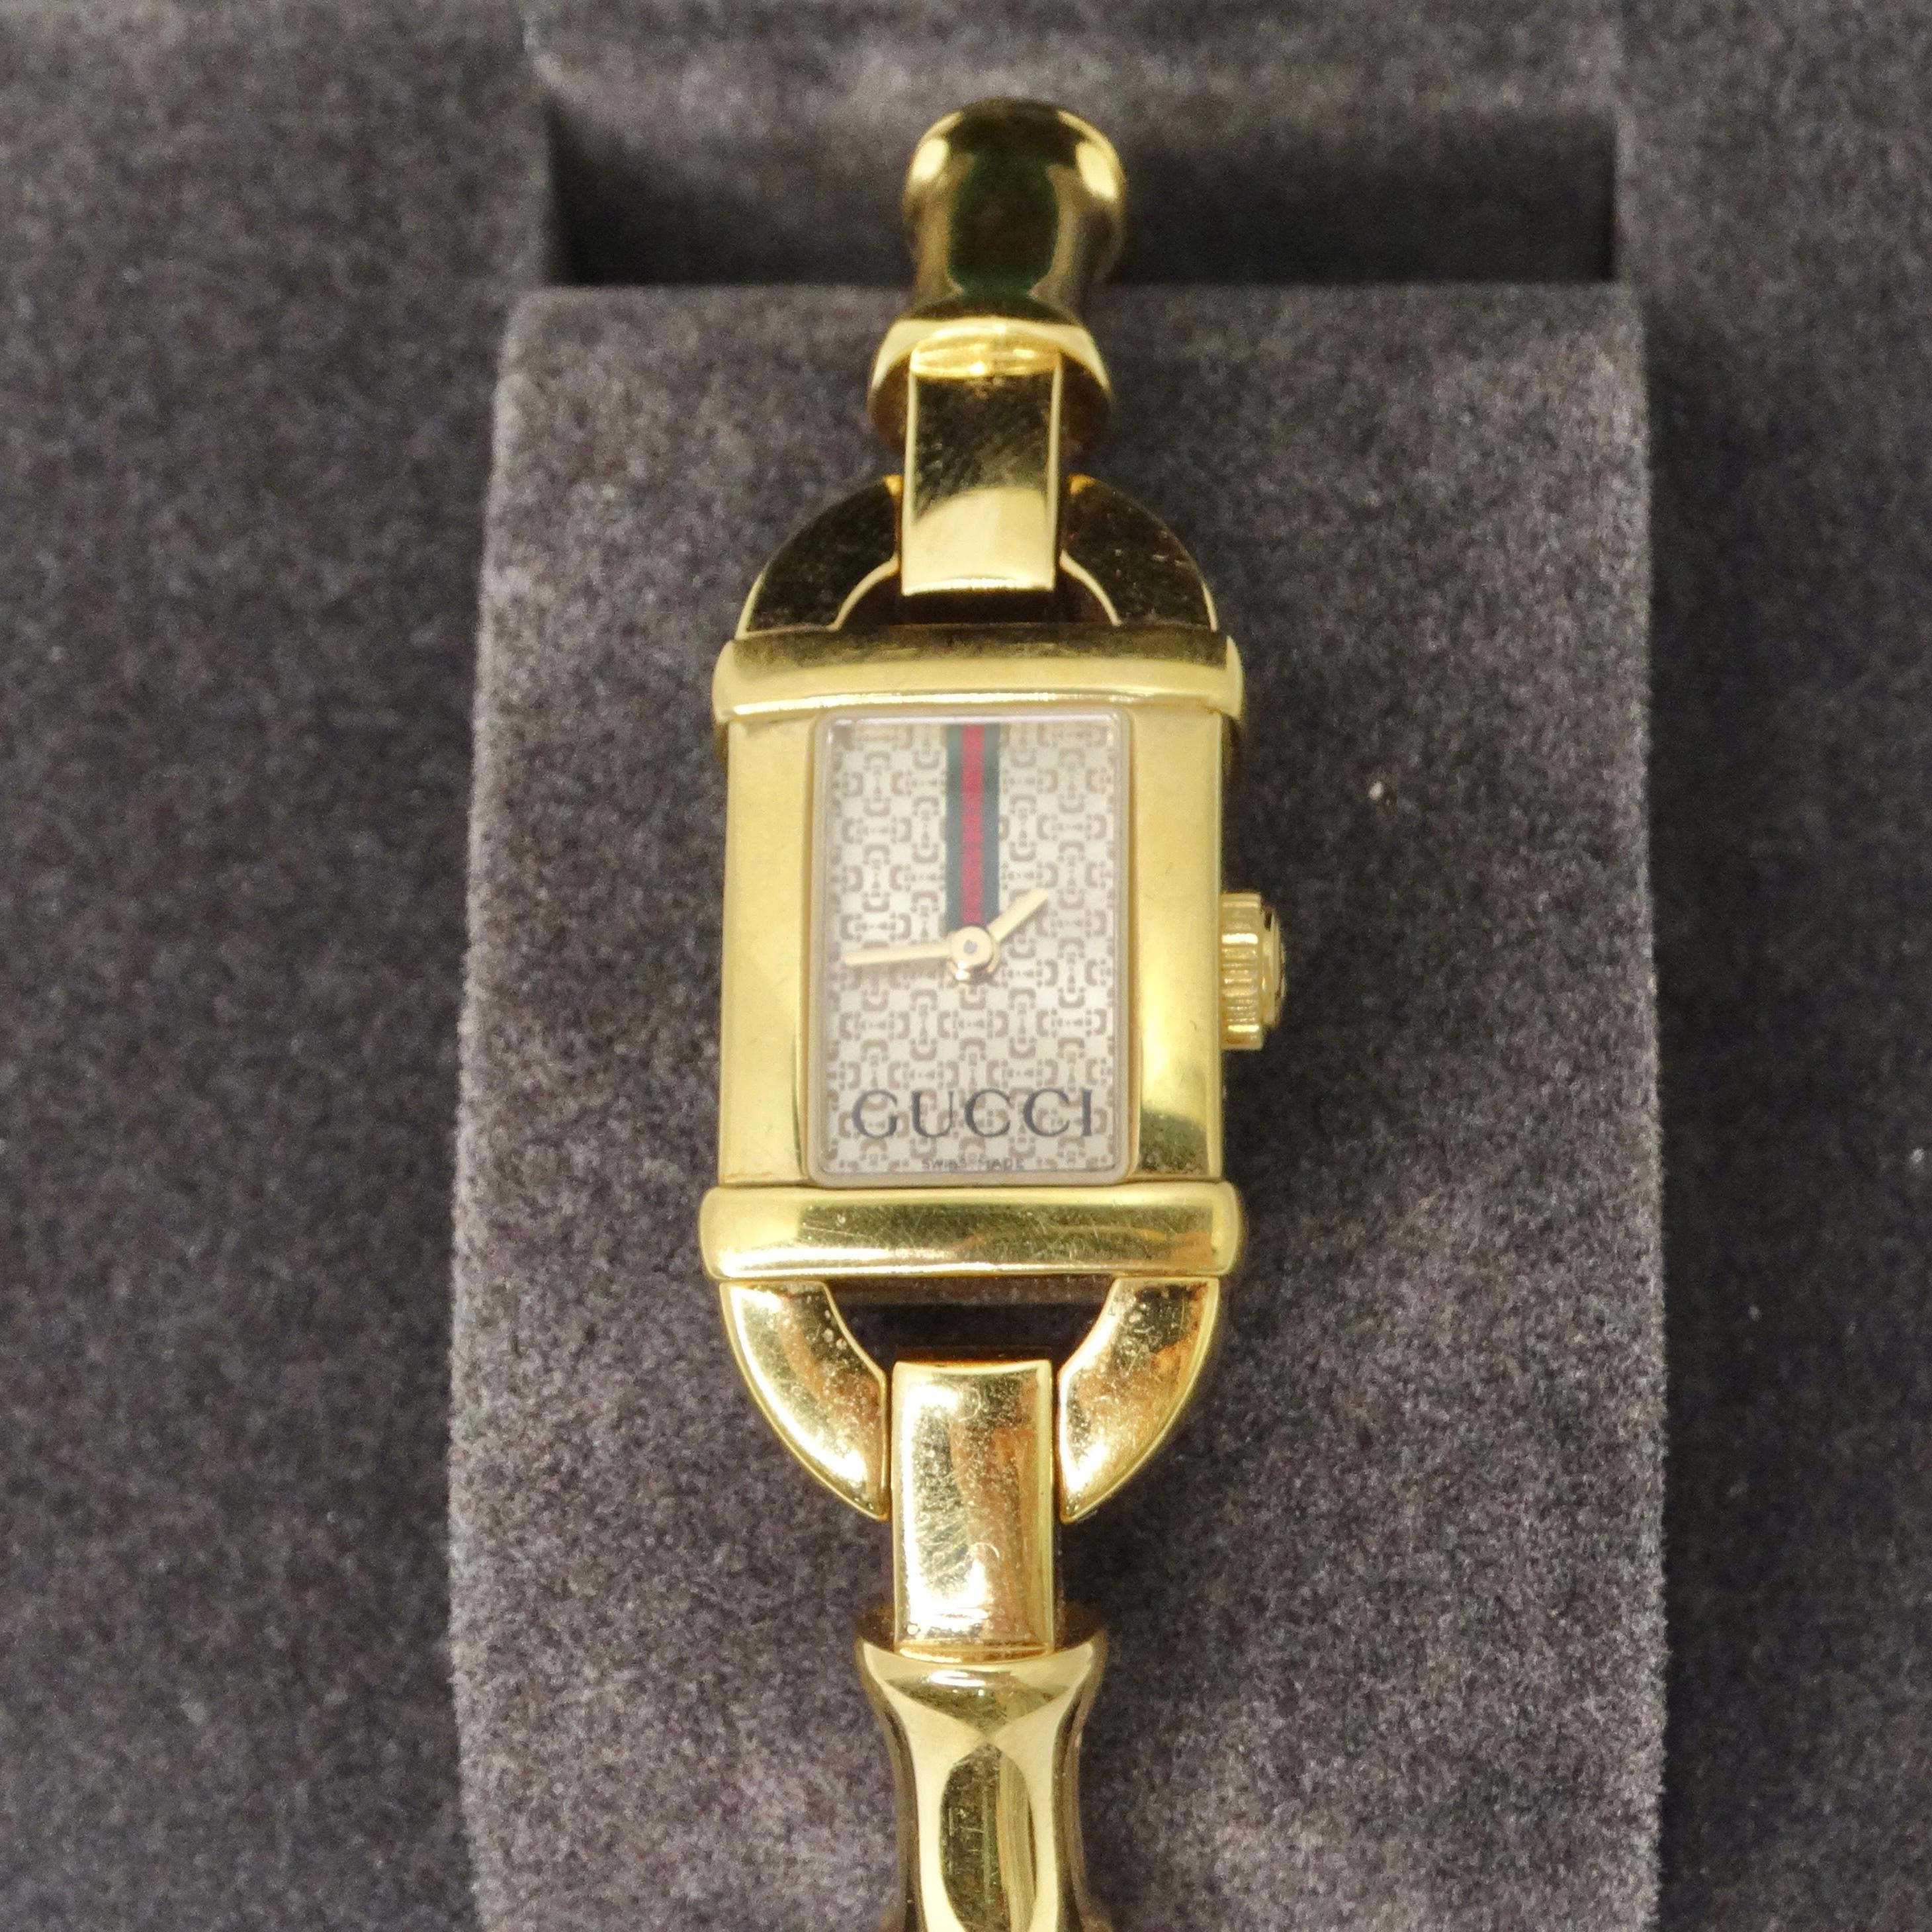 Gucci 6800 Yellow Gold Tone Bamboo Watch  In Excellent Condition For Sale In Scottsdale, AZ